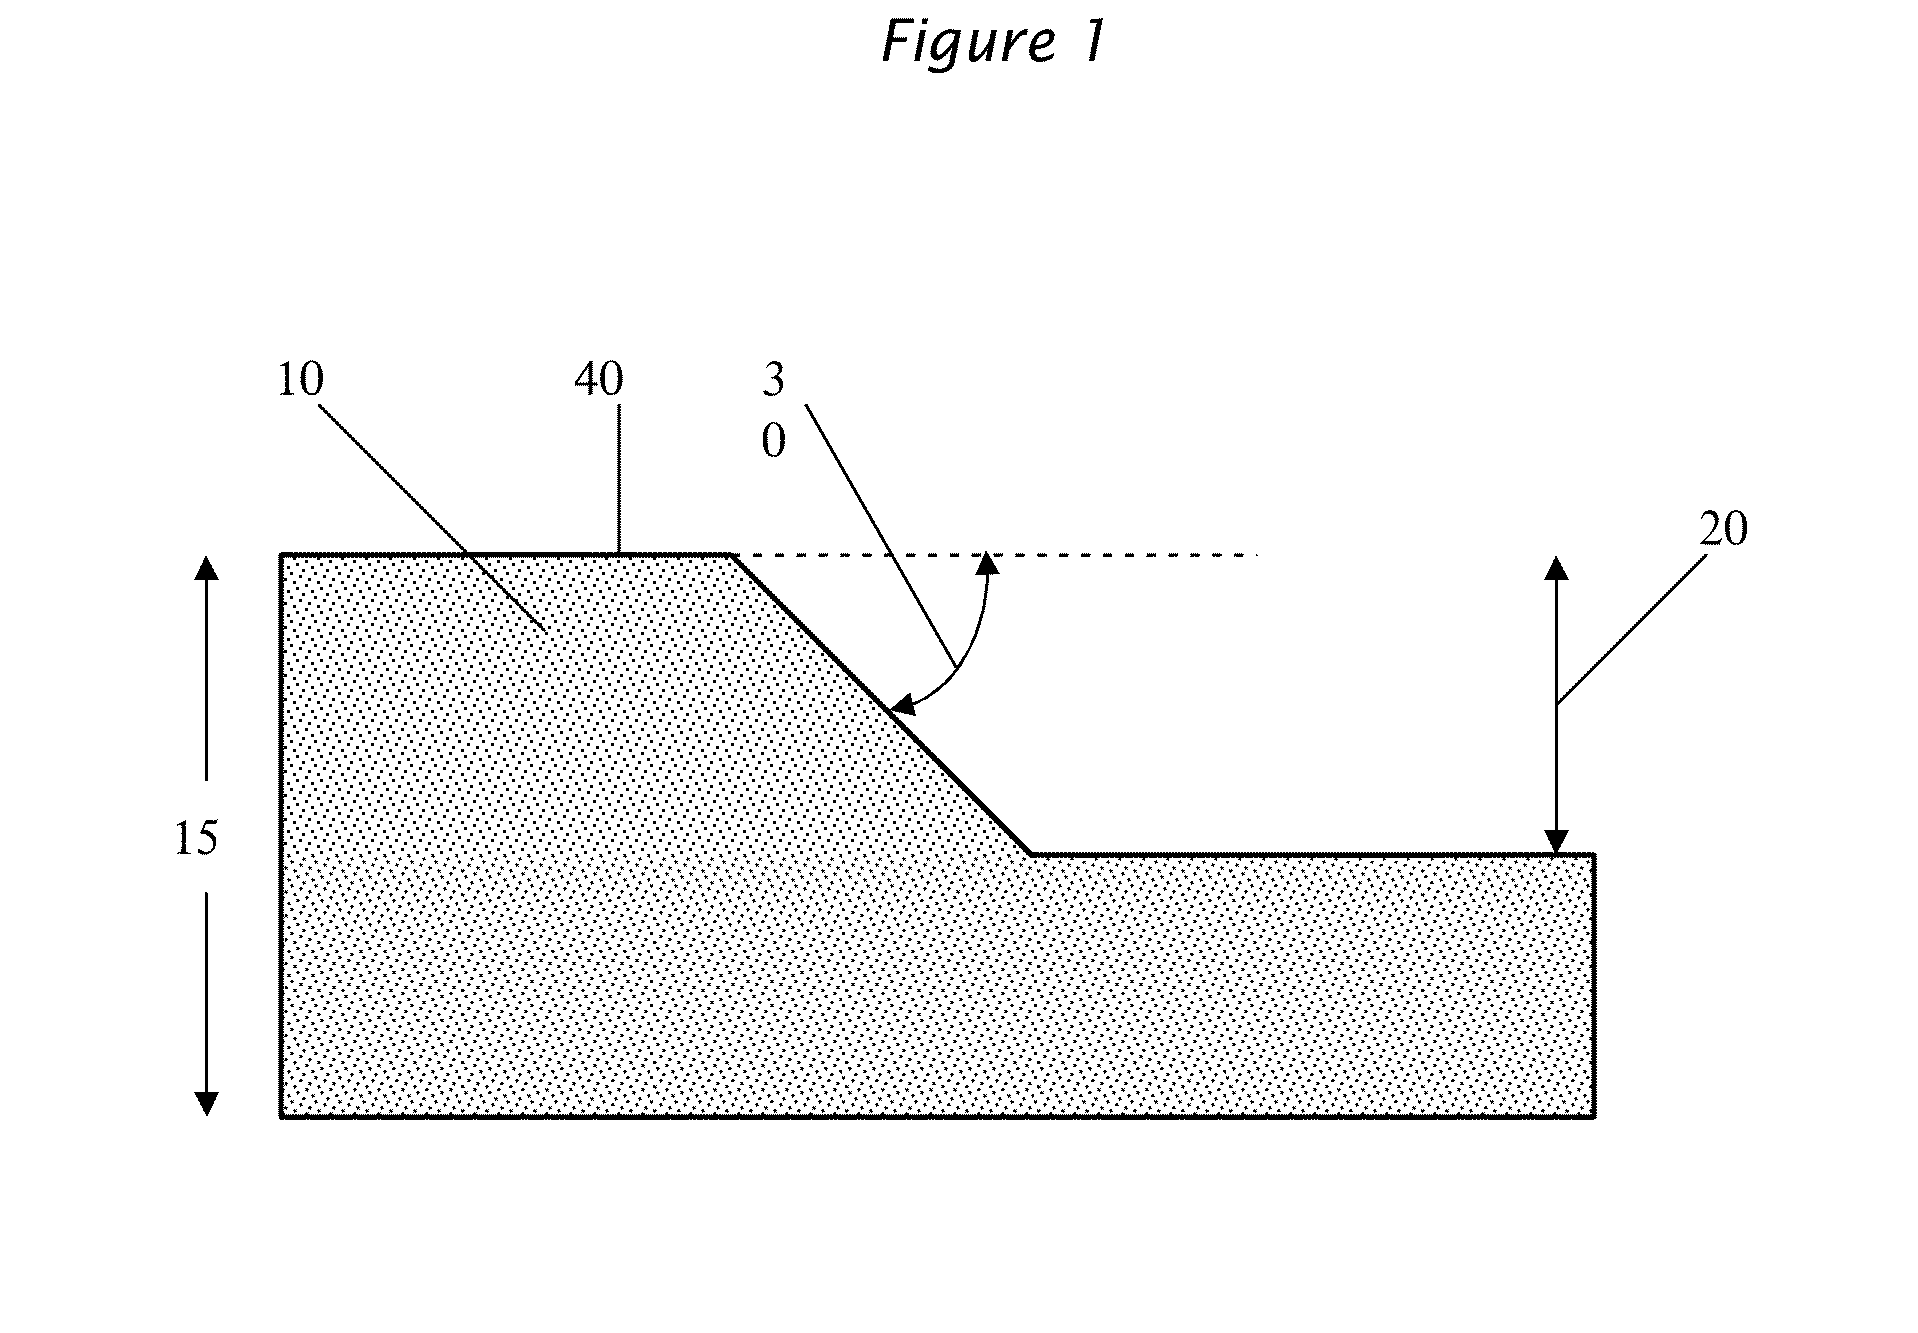 Method of forming extruded polystyrene foams and the products made therefrom